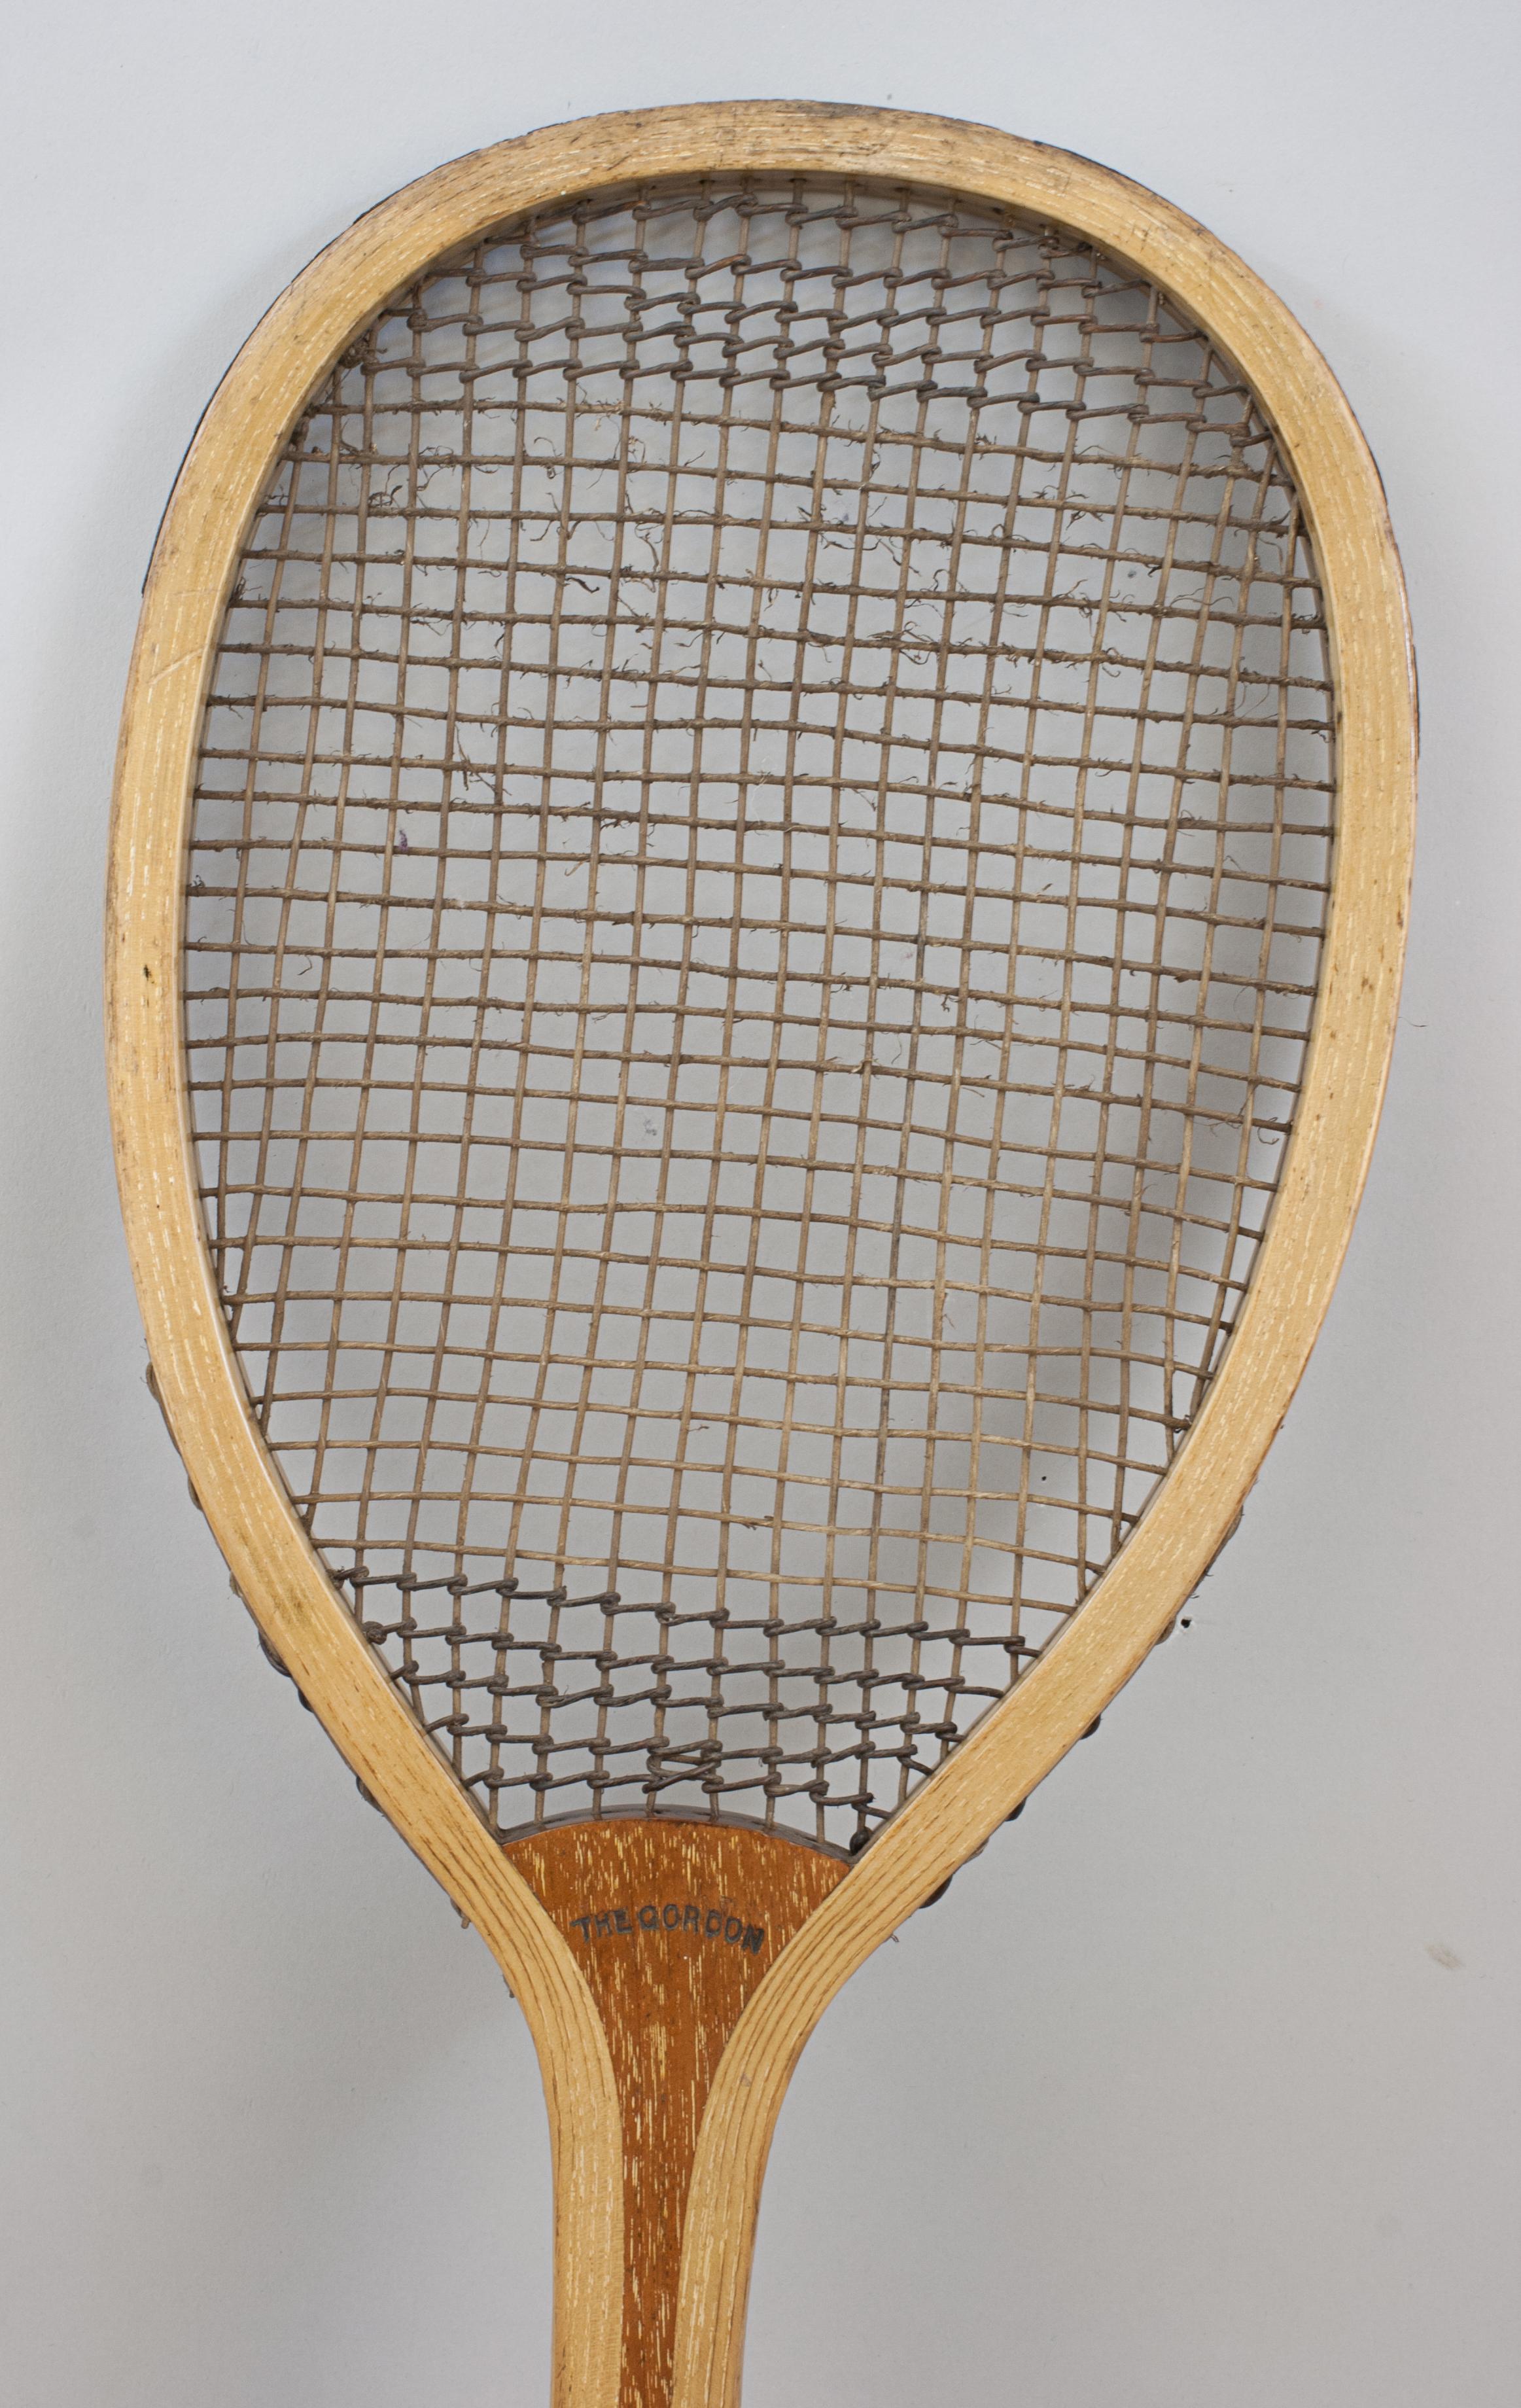 George Bussey Wooden Fishtail Tennis Racket, The Gordon
A lawn tennis racket by Bussey, 'The Gordon'. A nice ash frame with convex walnut wedge. The wedge is stamped 'The Gordon', top of the racket with a very faint 'Bussey' mark. The racket has